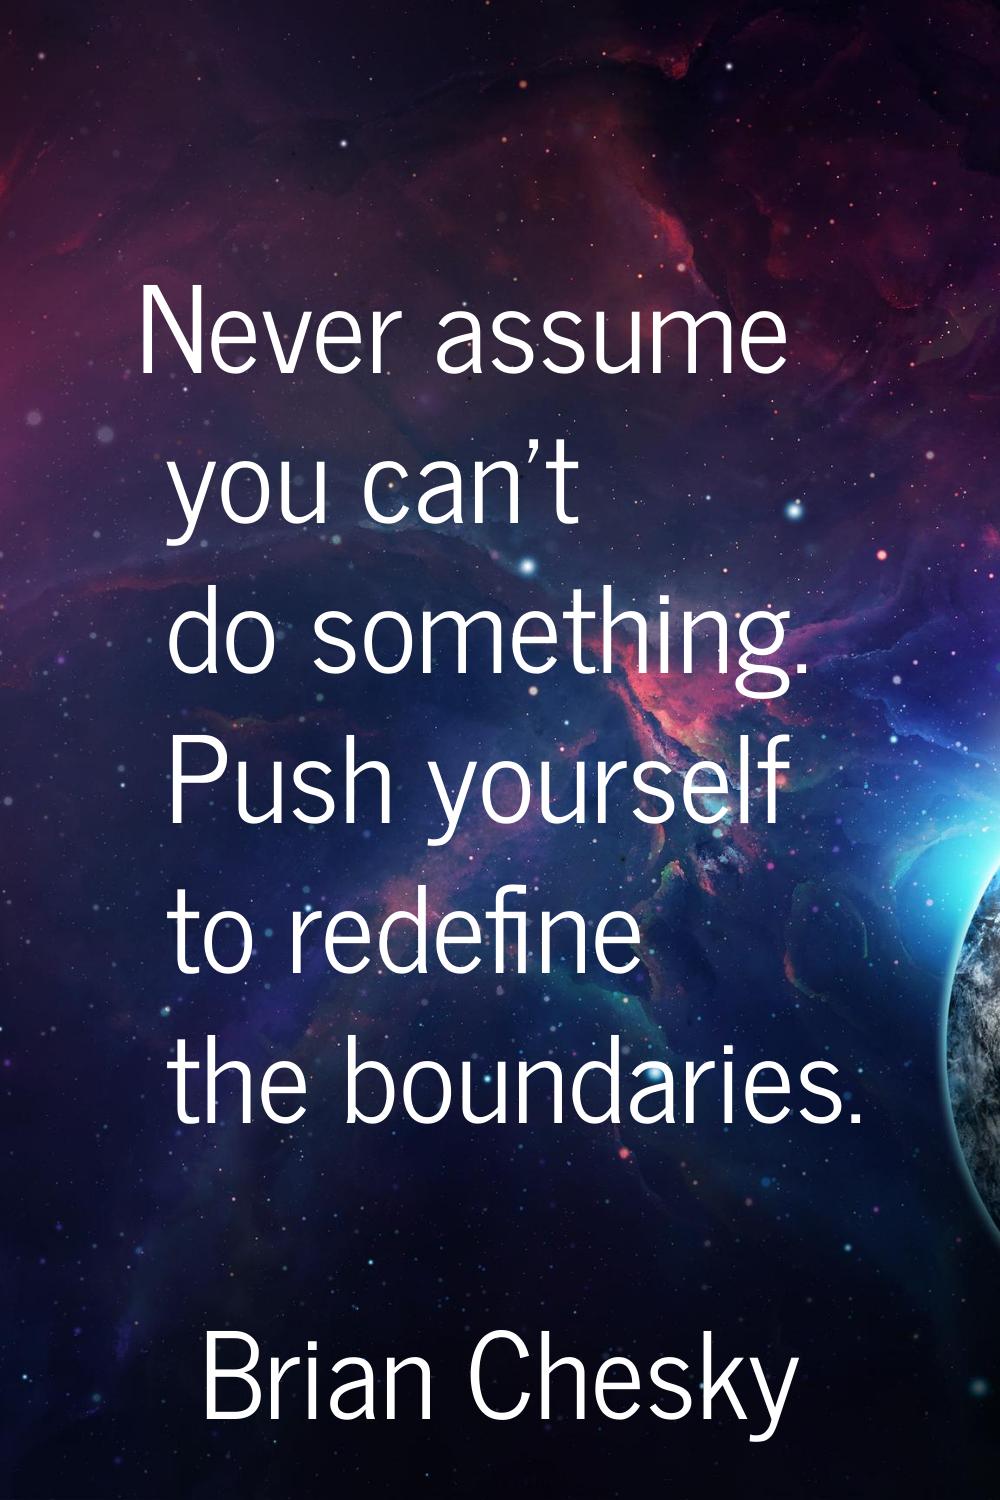 Never assume you can't do something. Push yourself to redefine the boundaries.